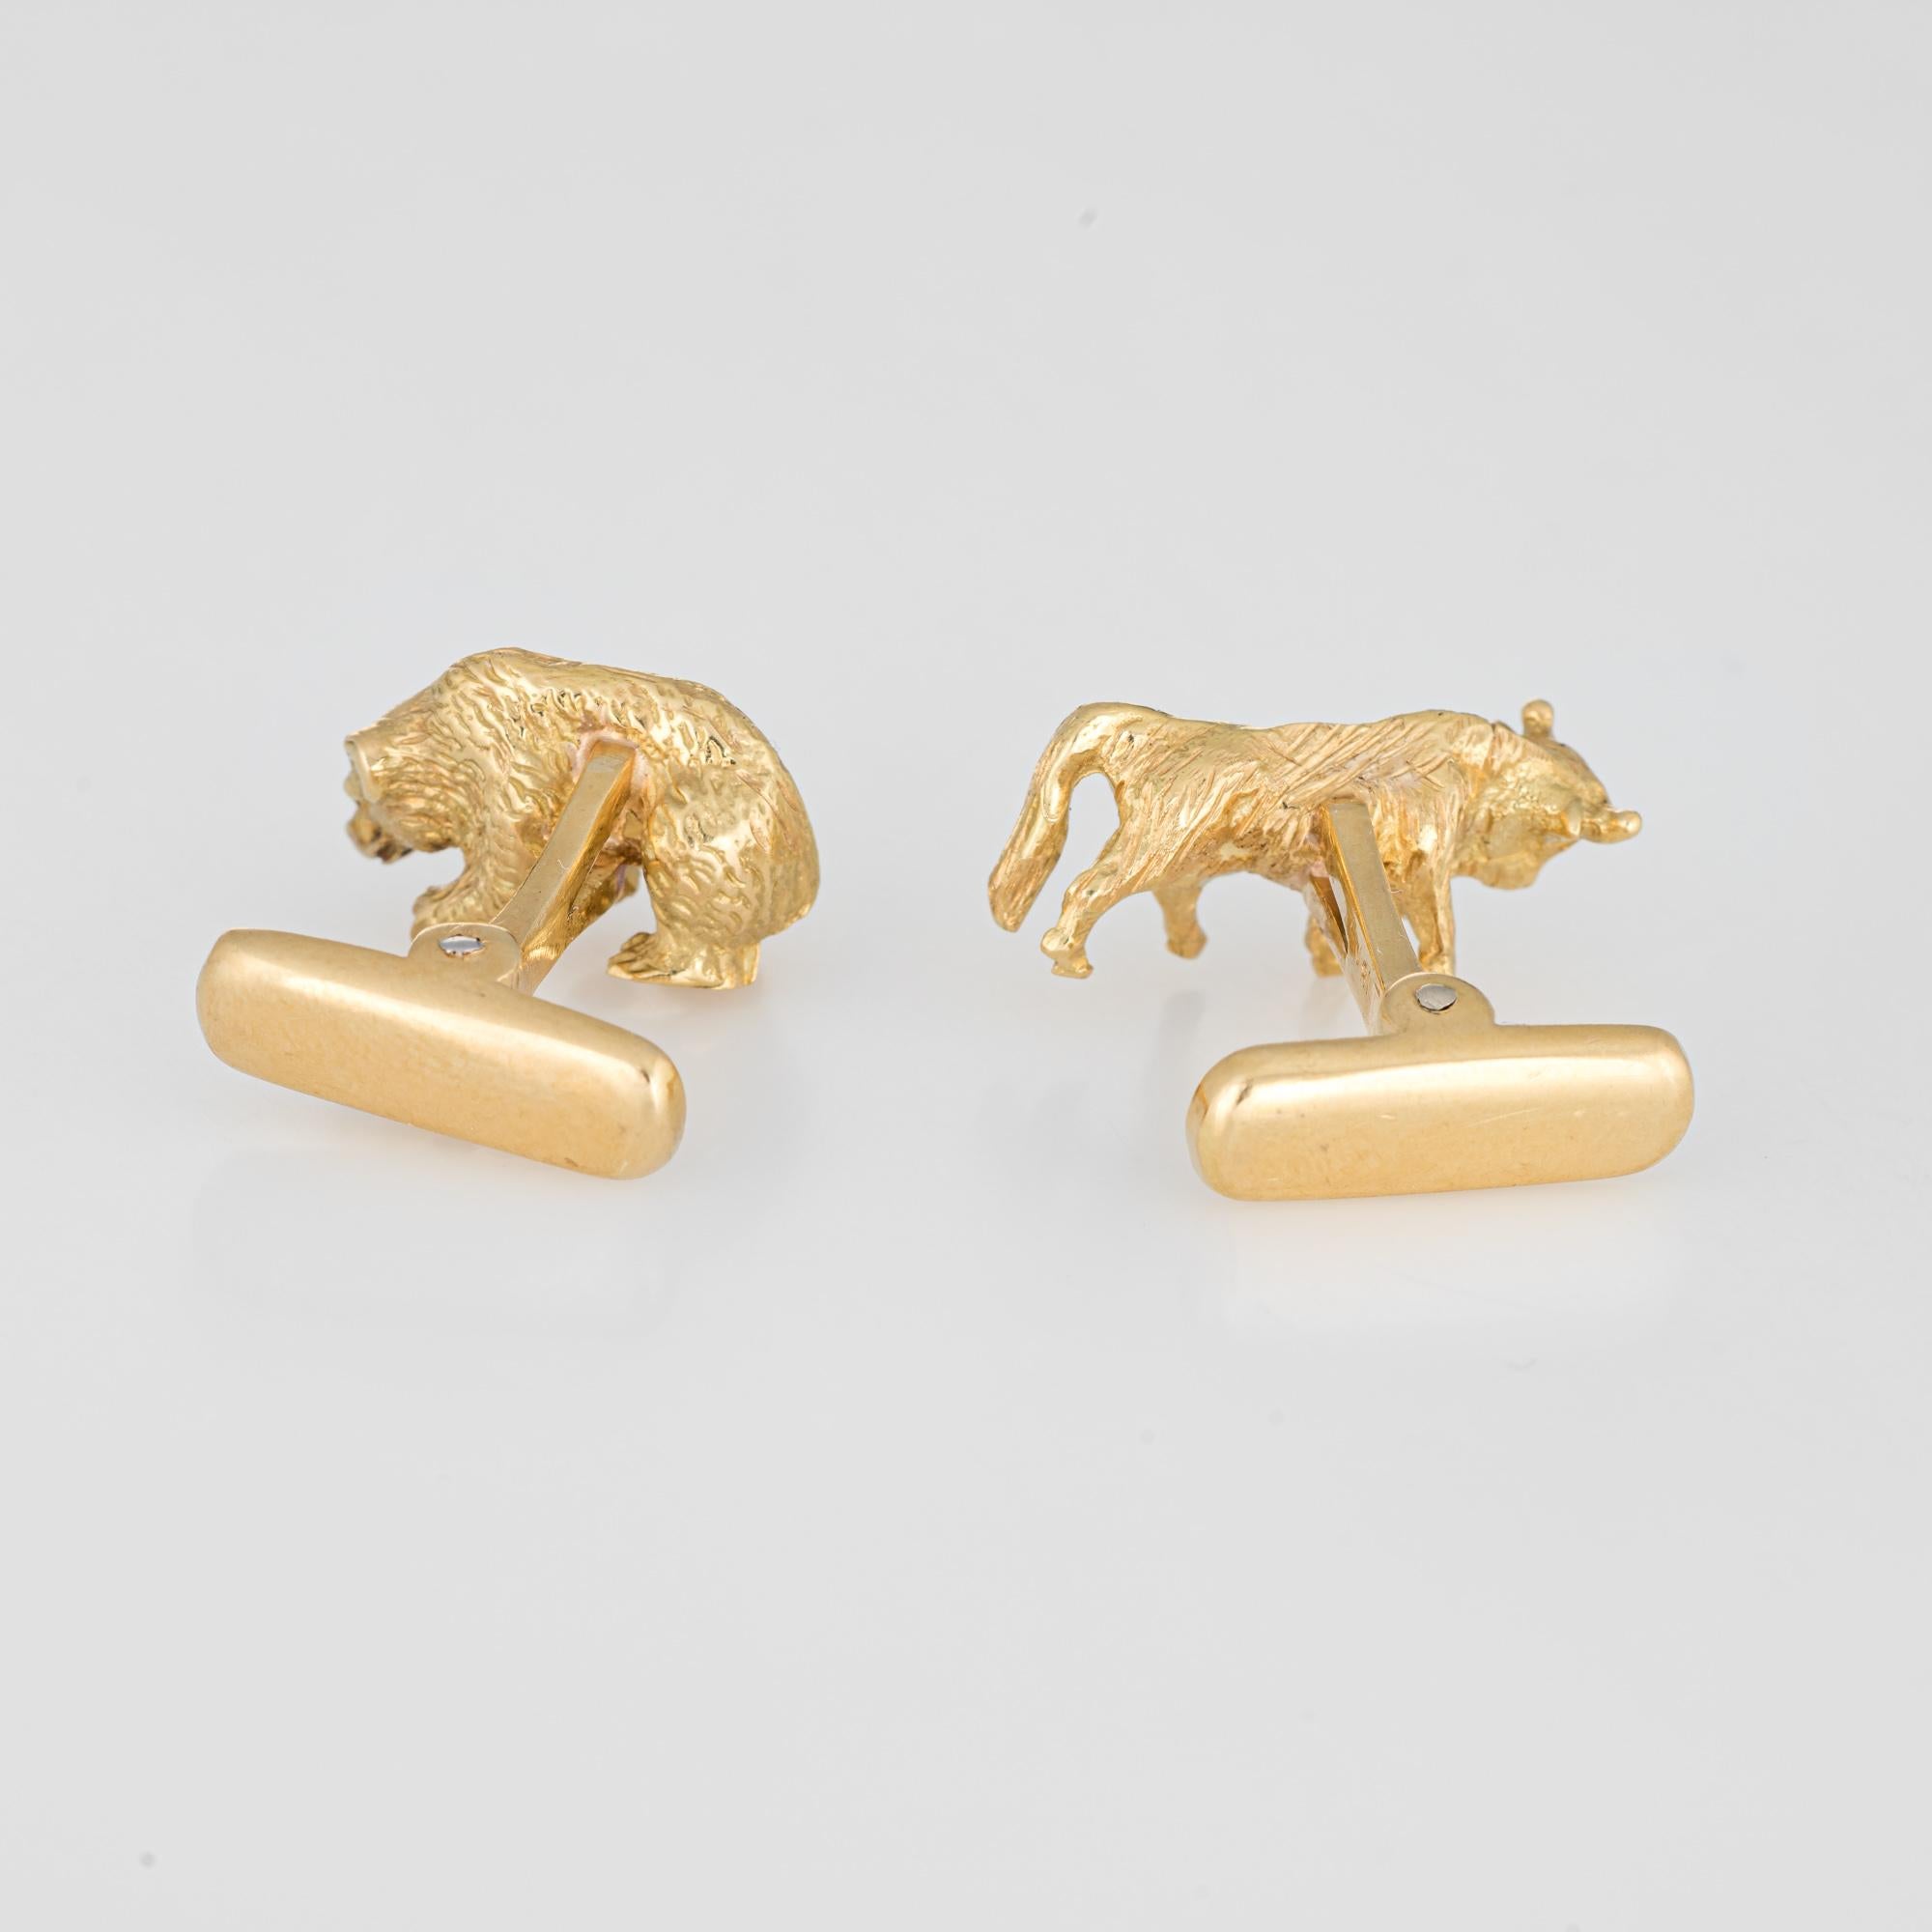 Finely detailed pair of Bull & Bear cufflinks crafted in 18k yellow gold. 

The Bull & Bear feature lifelike details and the cufflinks have a nice weighty feel (17.9 grams). Ideal for day or evening wear. 

The earrings are in very good original